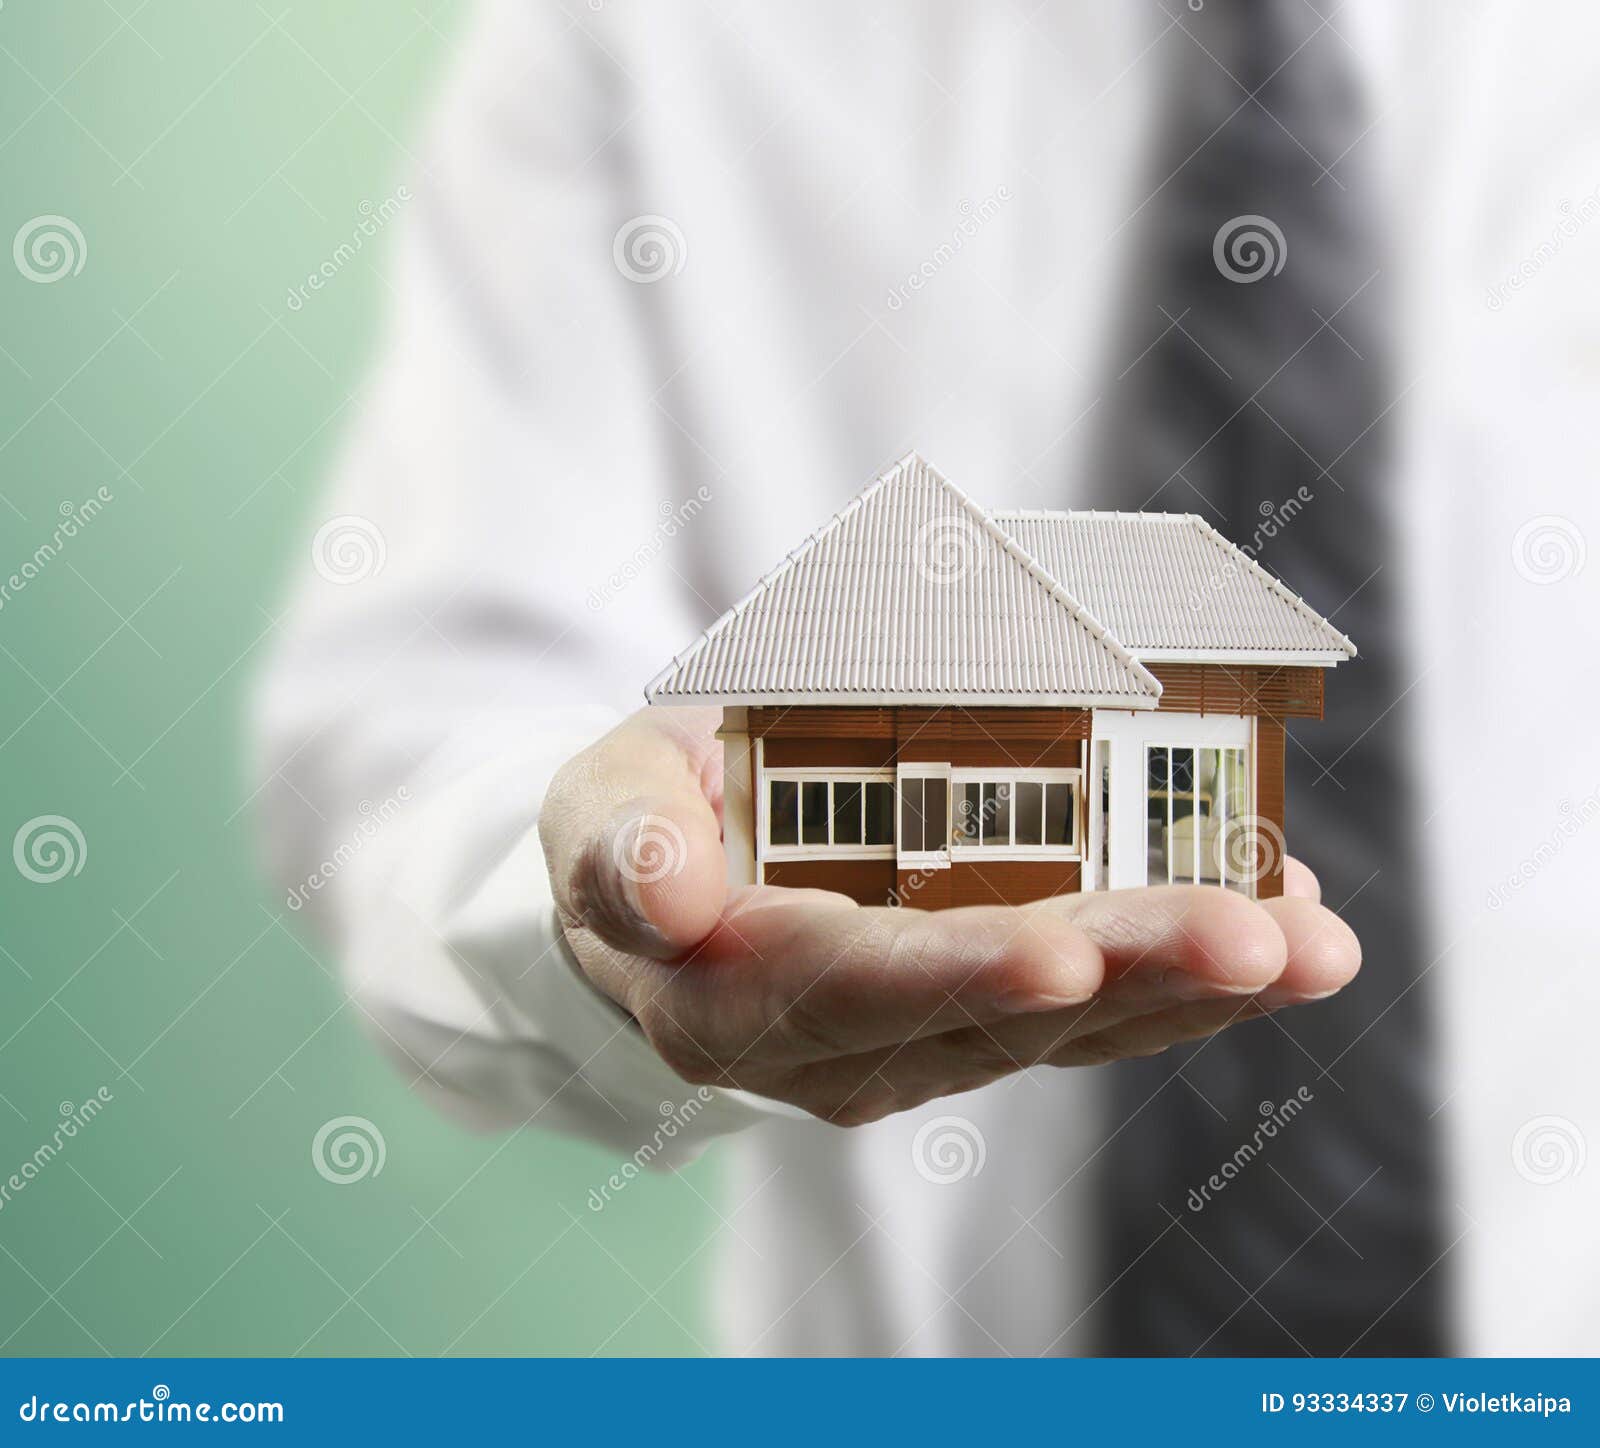 home insurance concept in hand